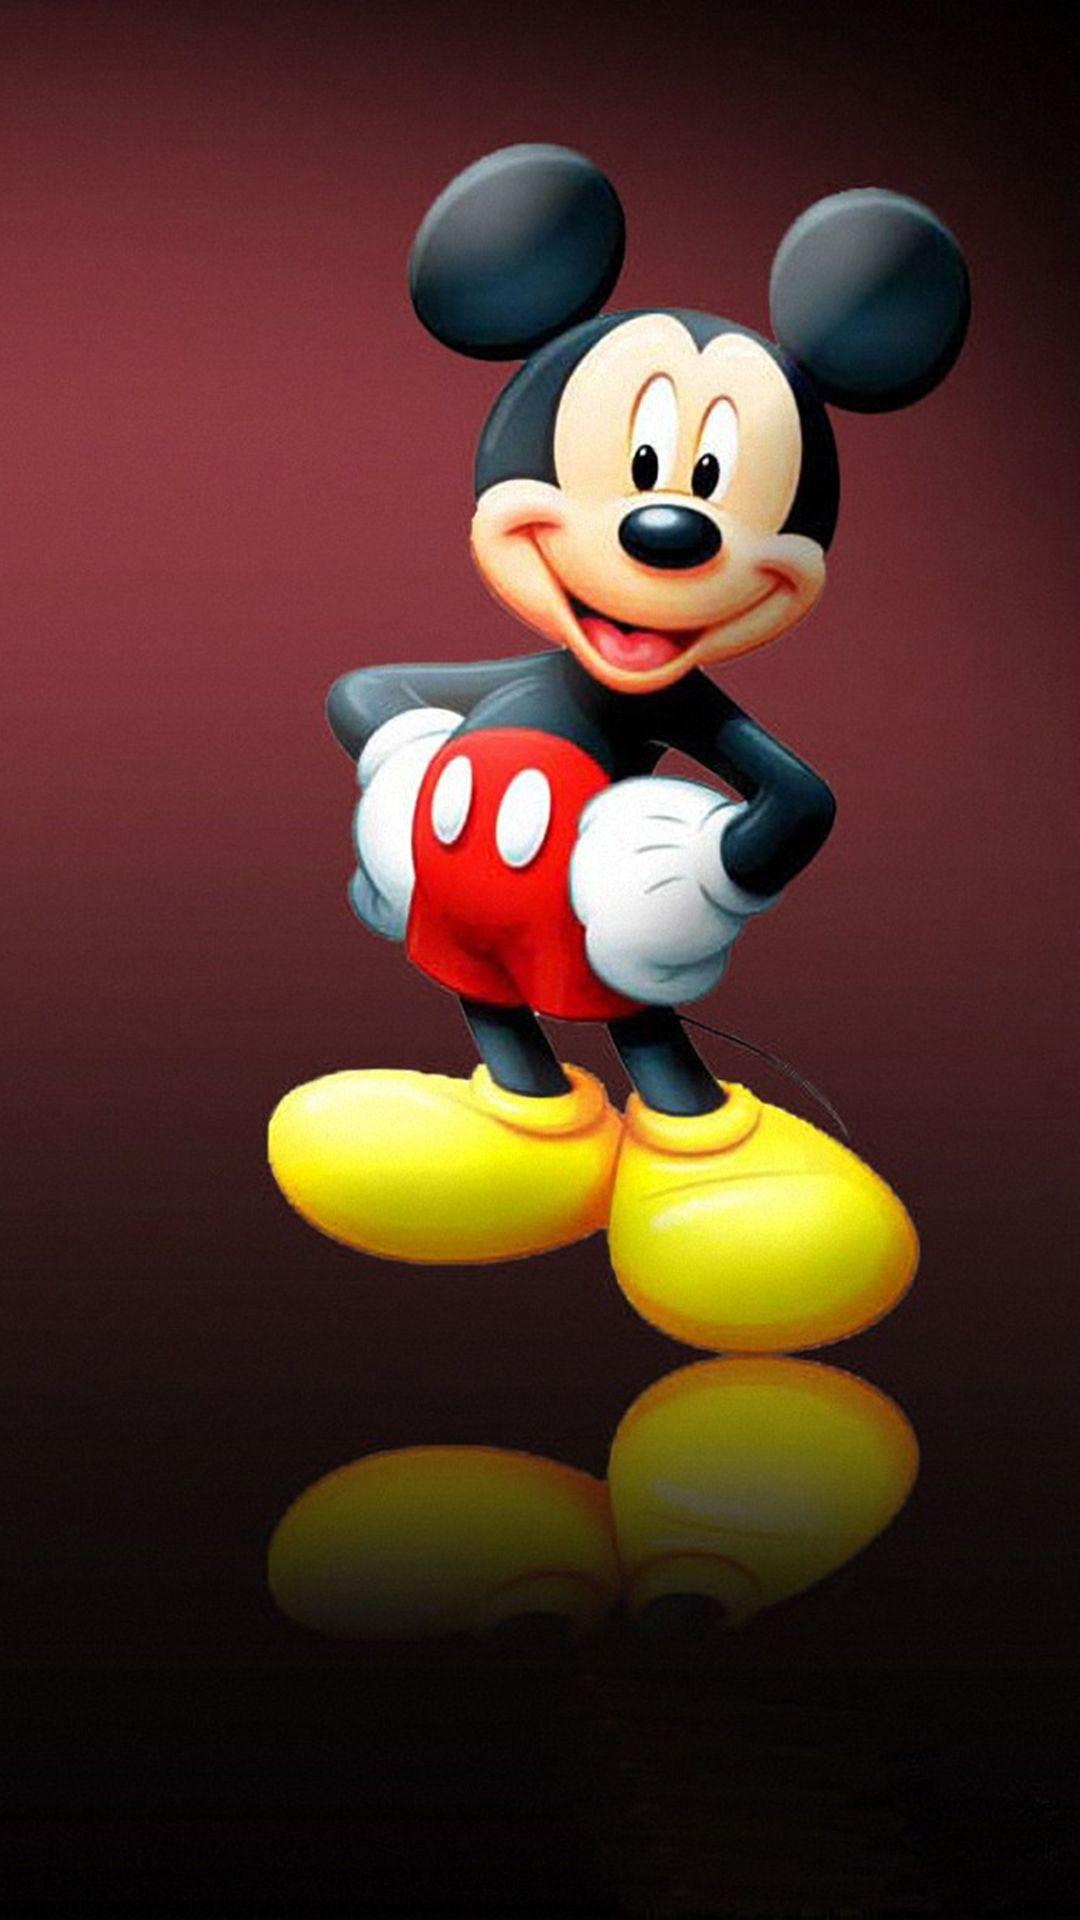 Mickey Mouse Disney iPhone Background Wallpaper phone